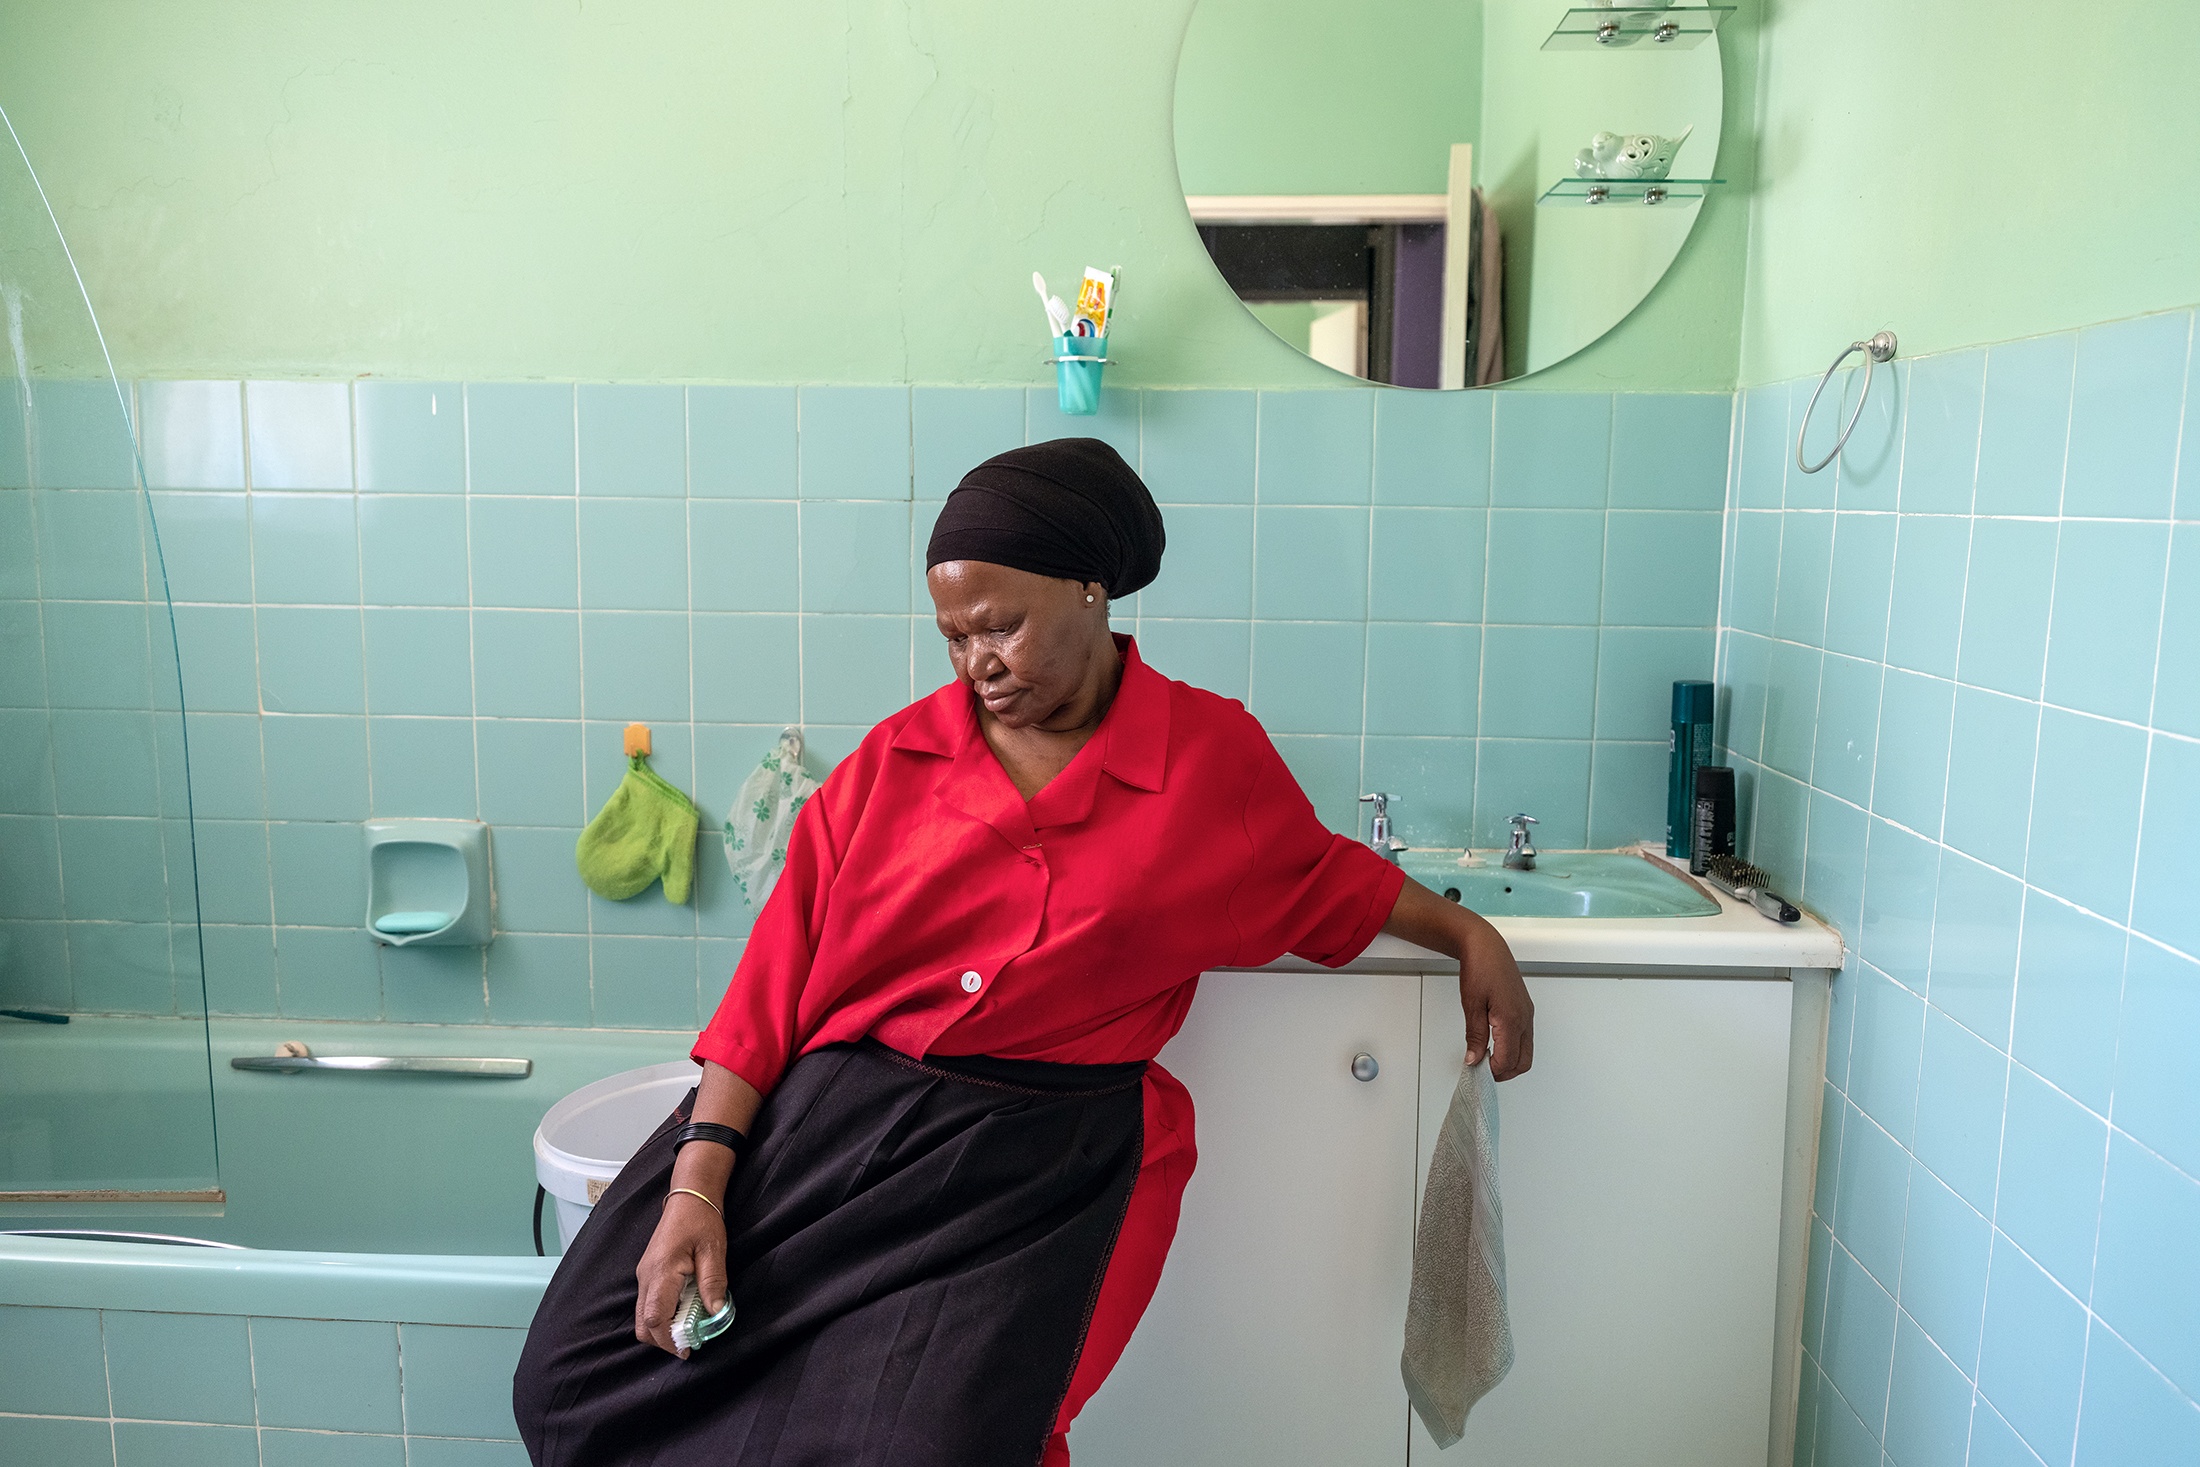 Lindokuhle Sobekwa's photograph 'My mother at work' shows an adult sitting on the rim of a bathtub.
